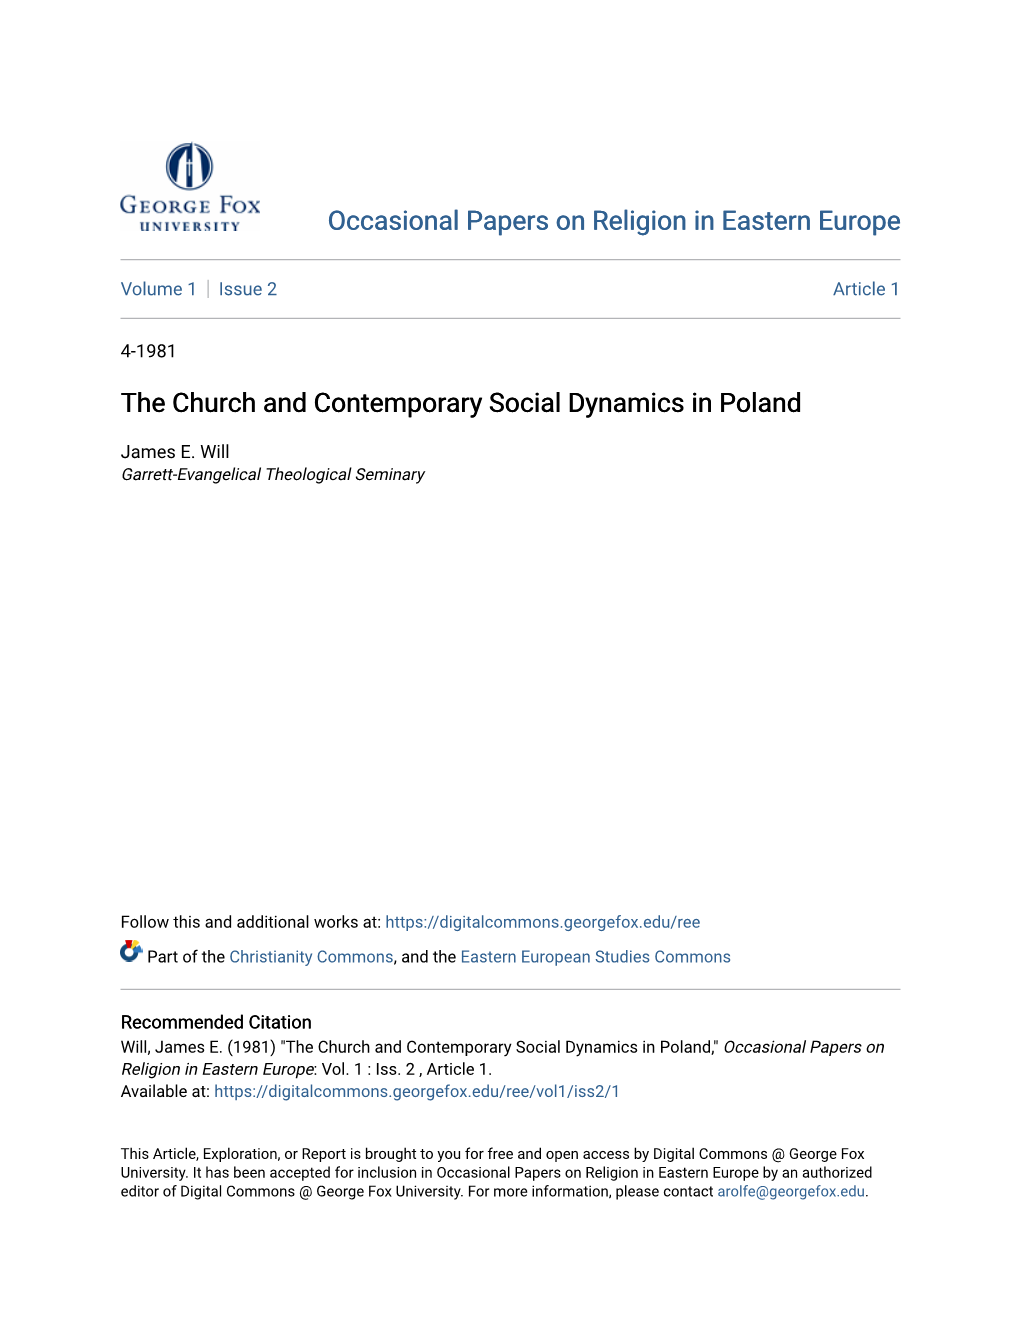 The Church and Contemporary Social Dynamics in Poland